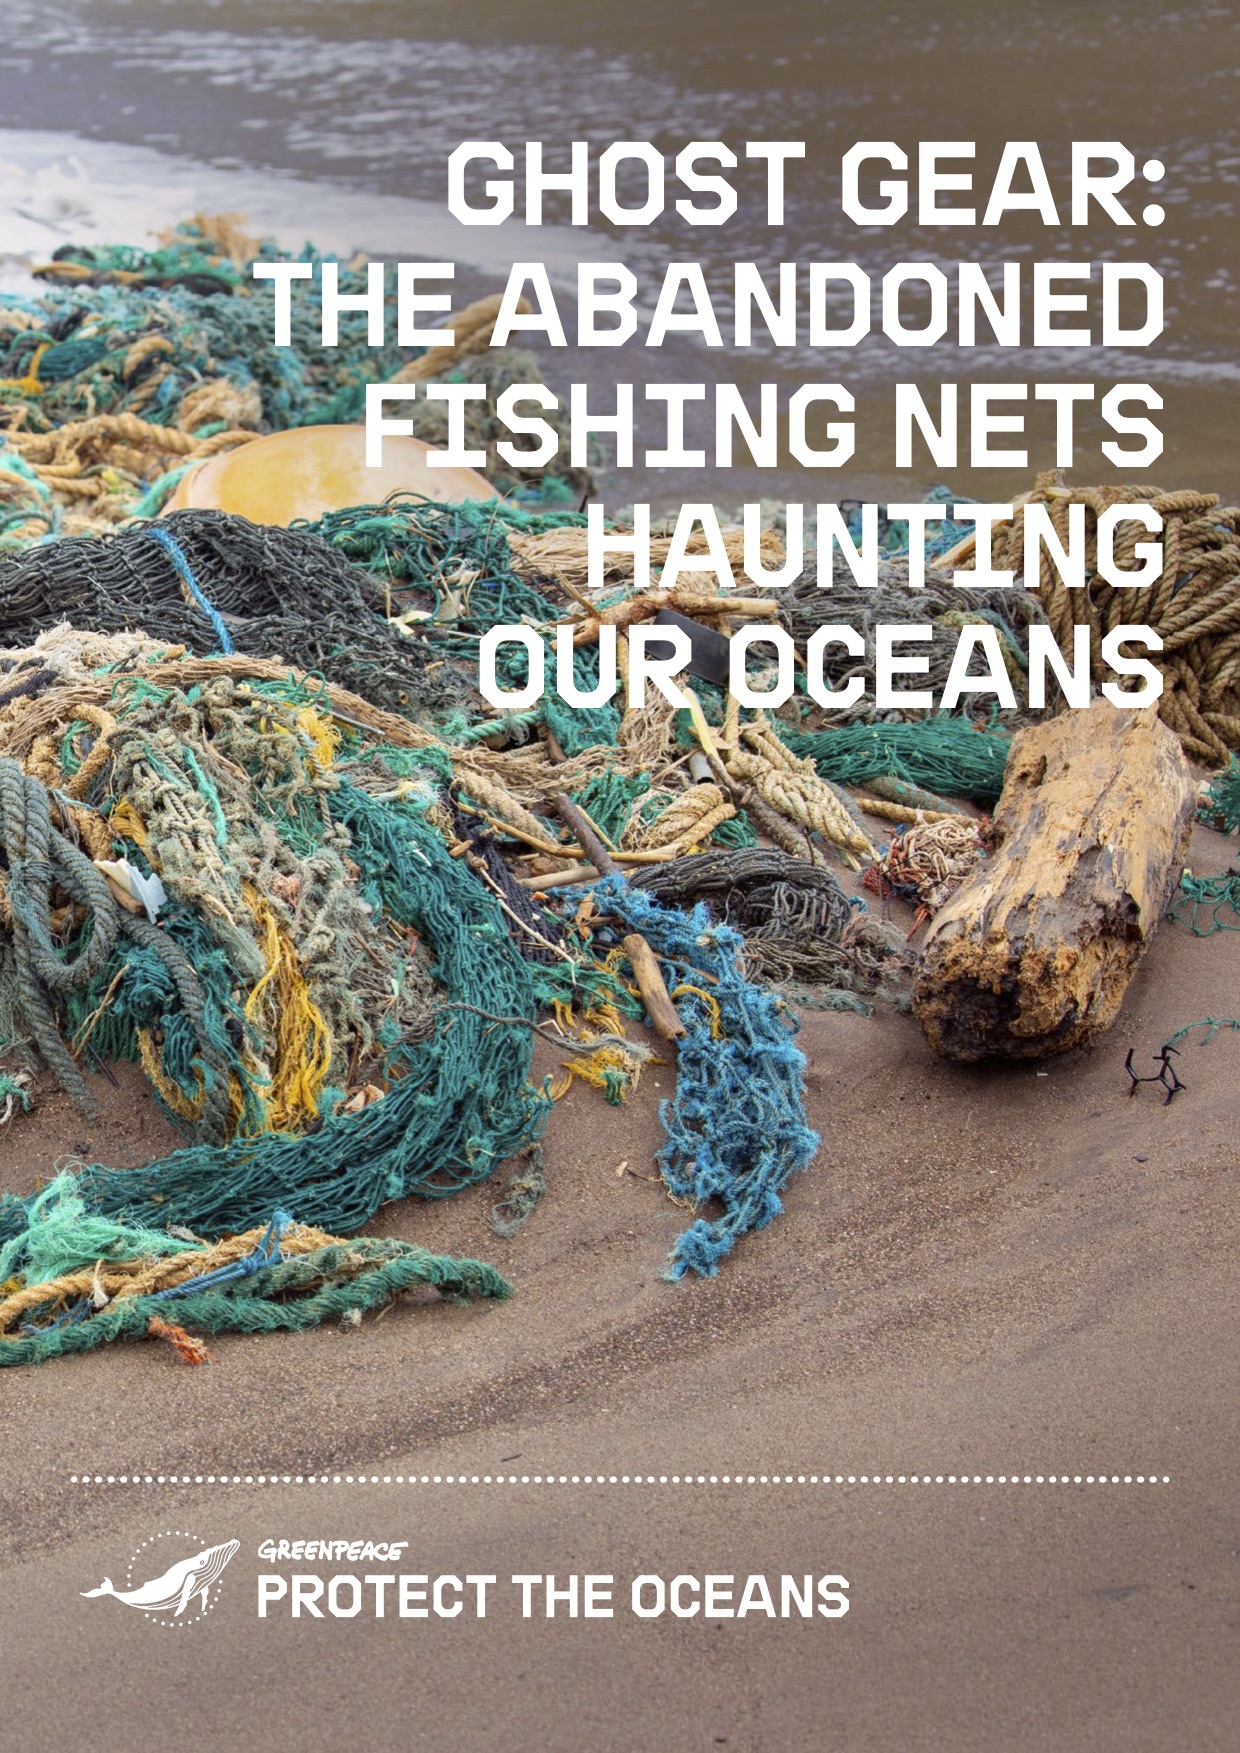 Ghost Gear: The Abandoned Fishing Nets Haunting Our Oceans